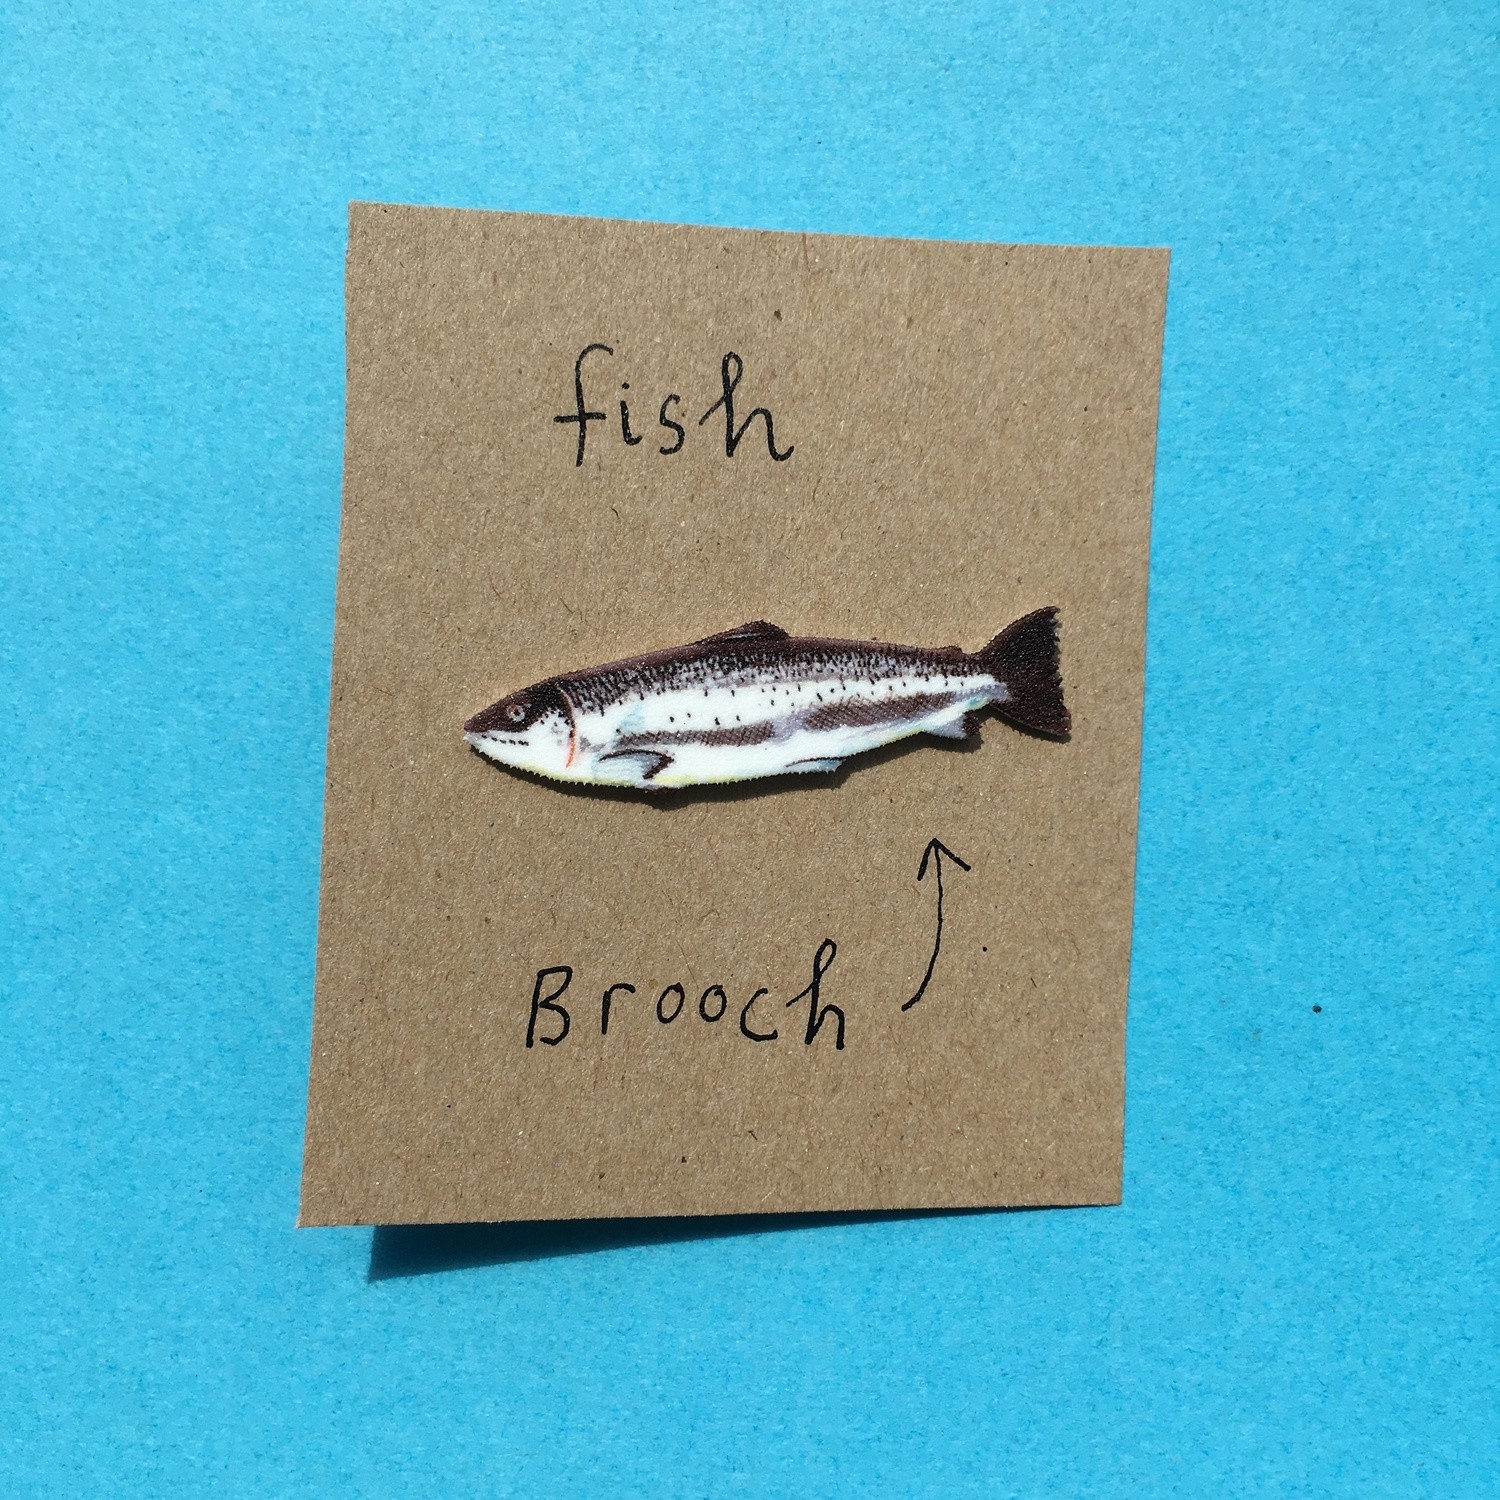 FISH BROOCH
Shipping included!